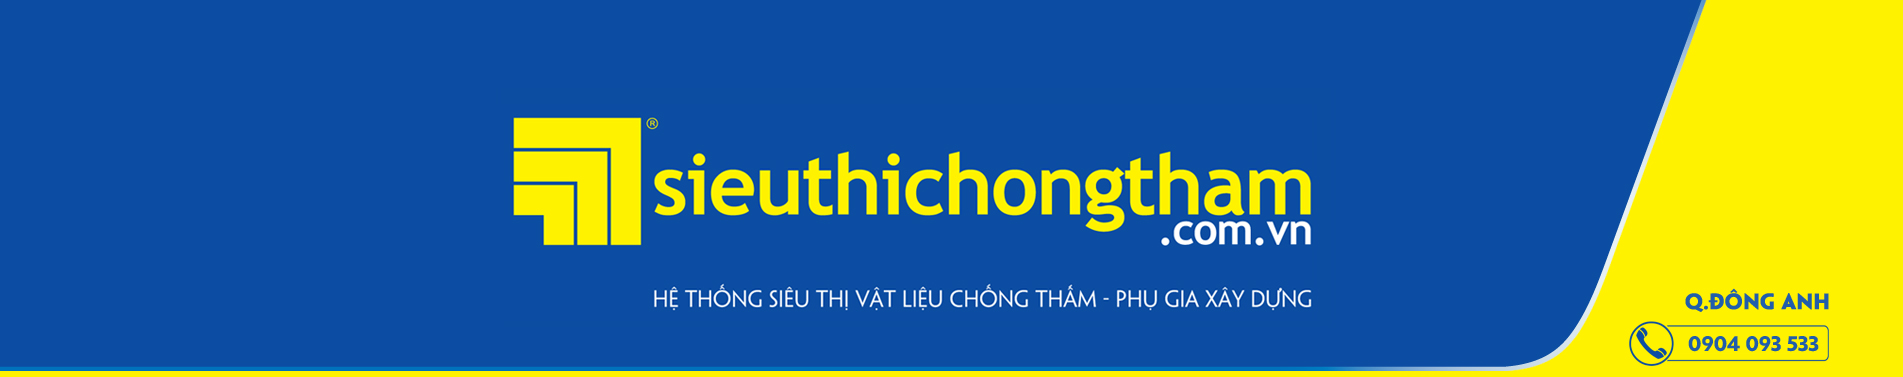 Dong Anh Banner